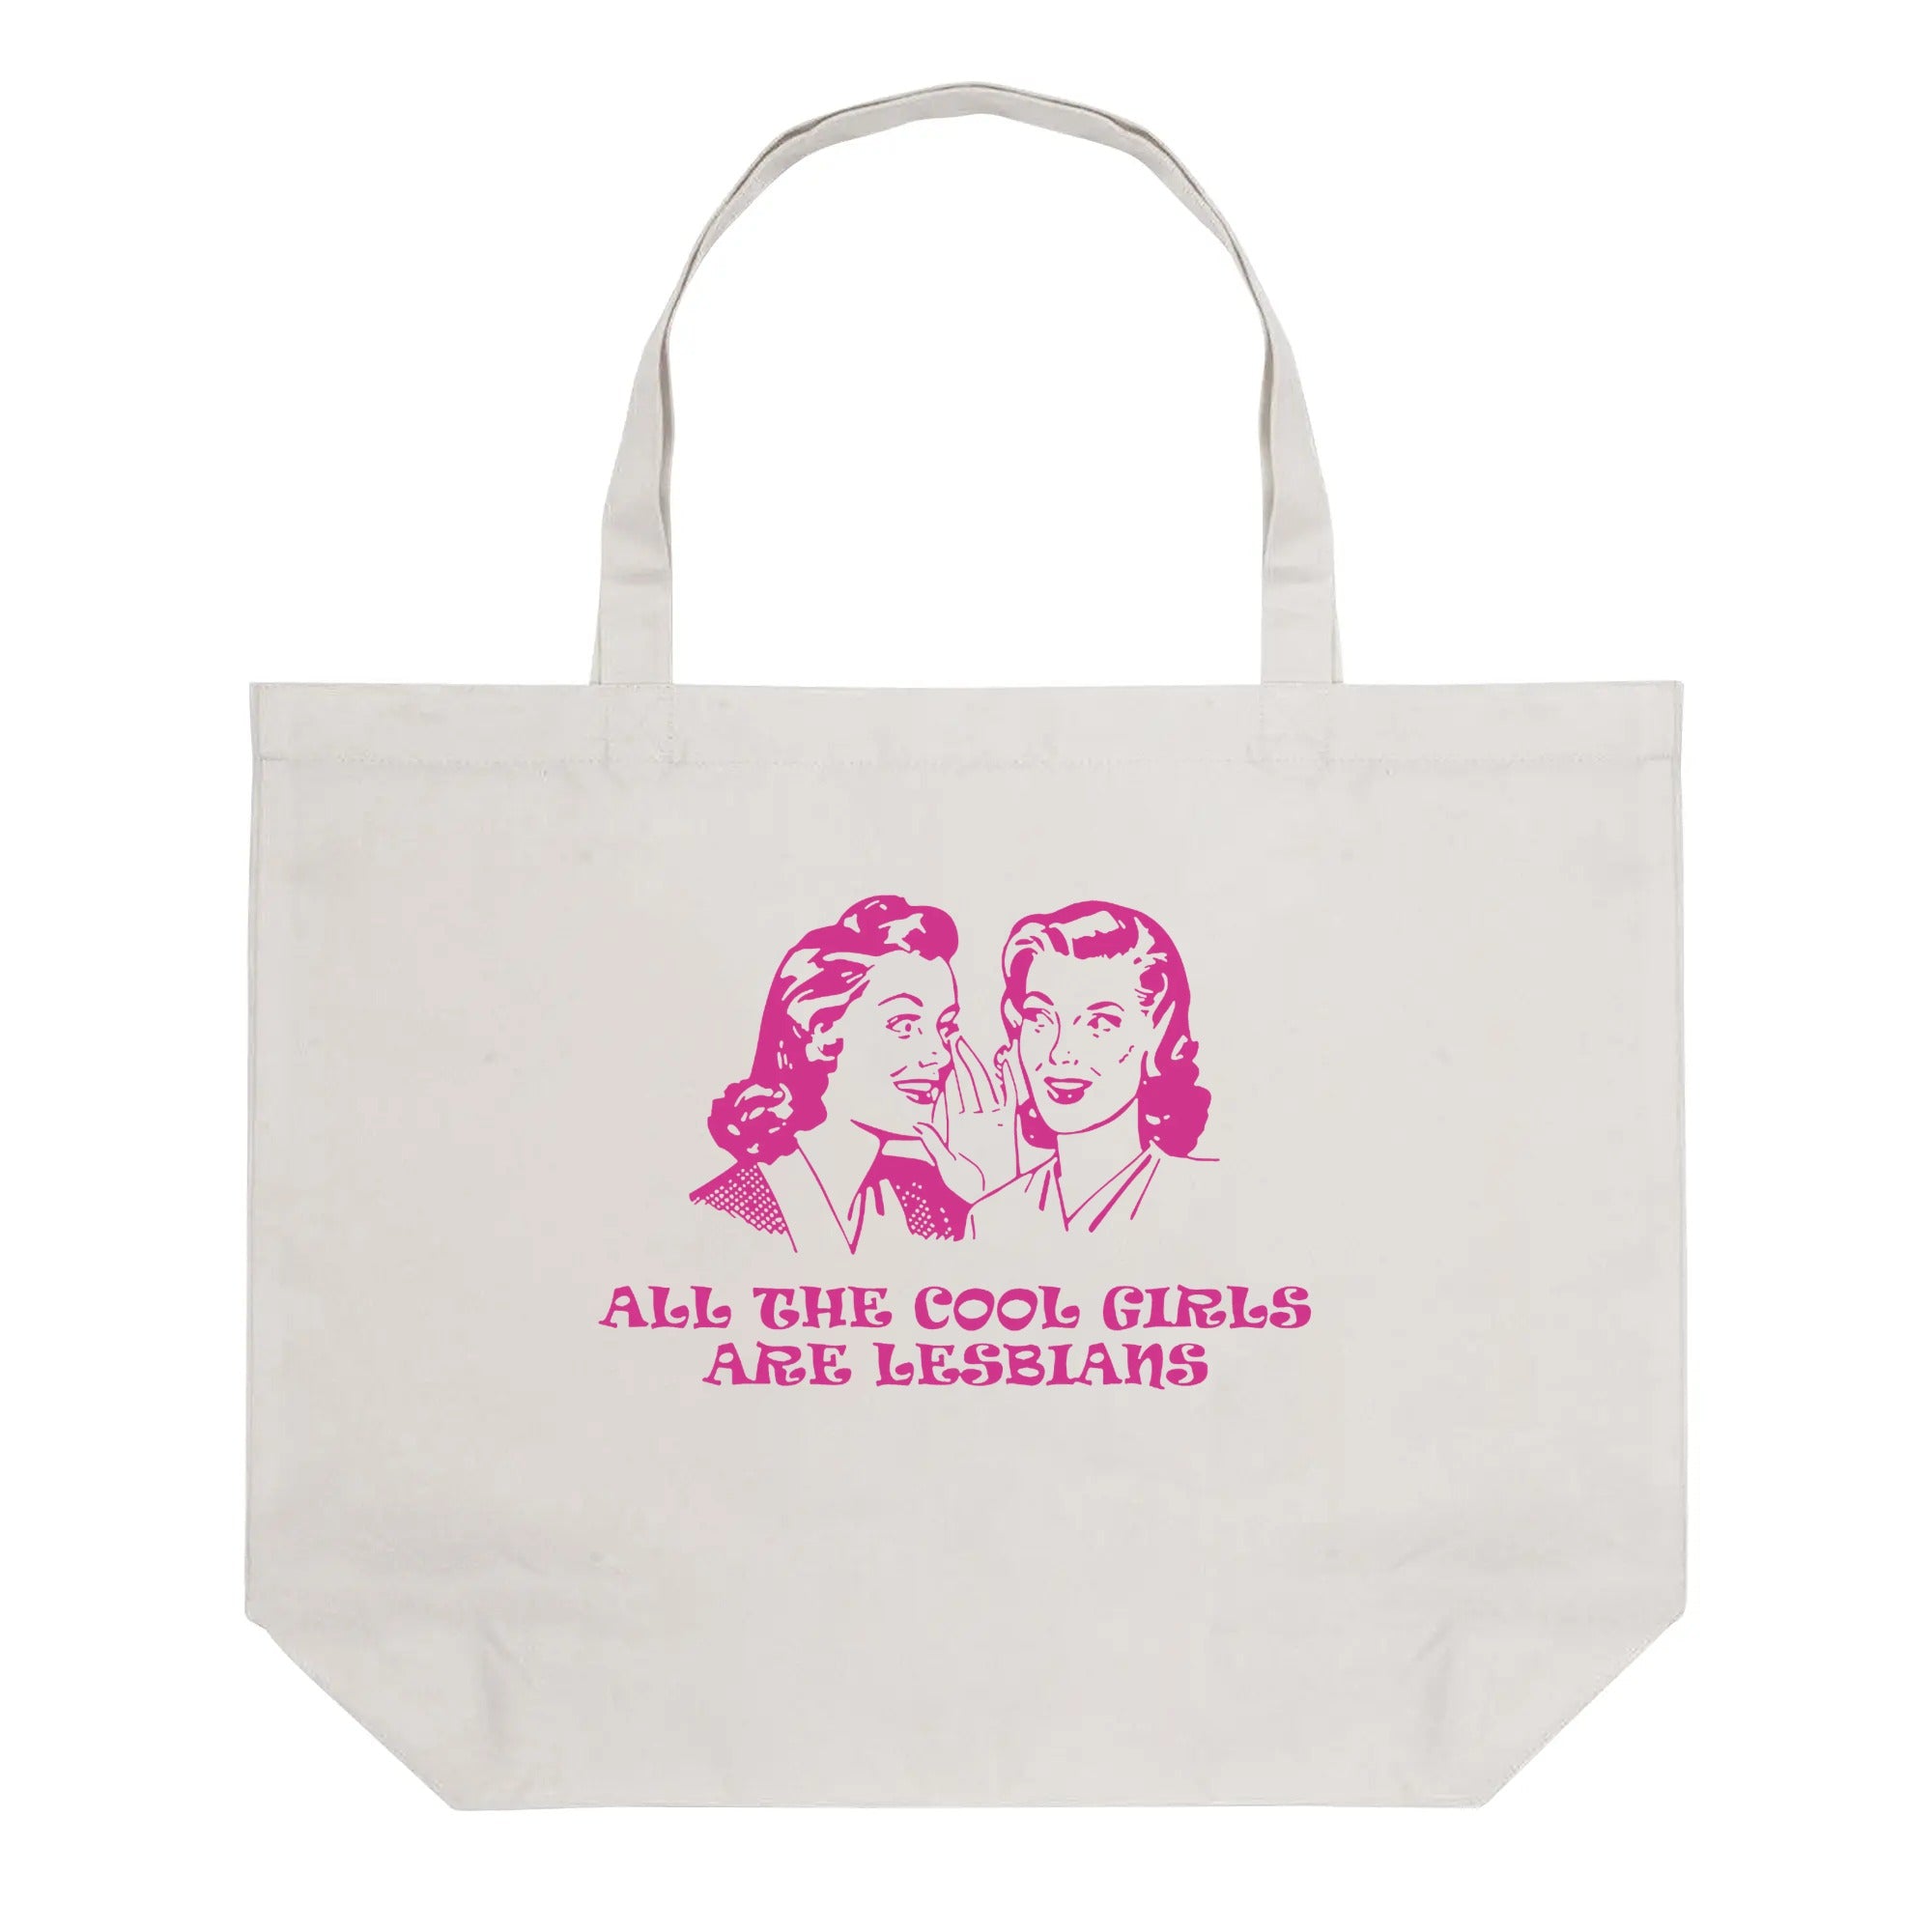 All the Cool Girls are Lesbians Tote Bag - Rose Gold Co. Shop